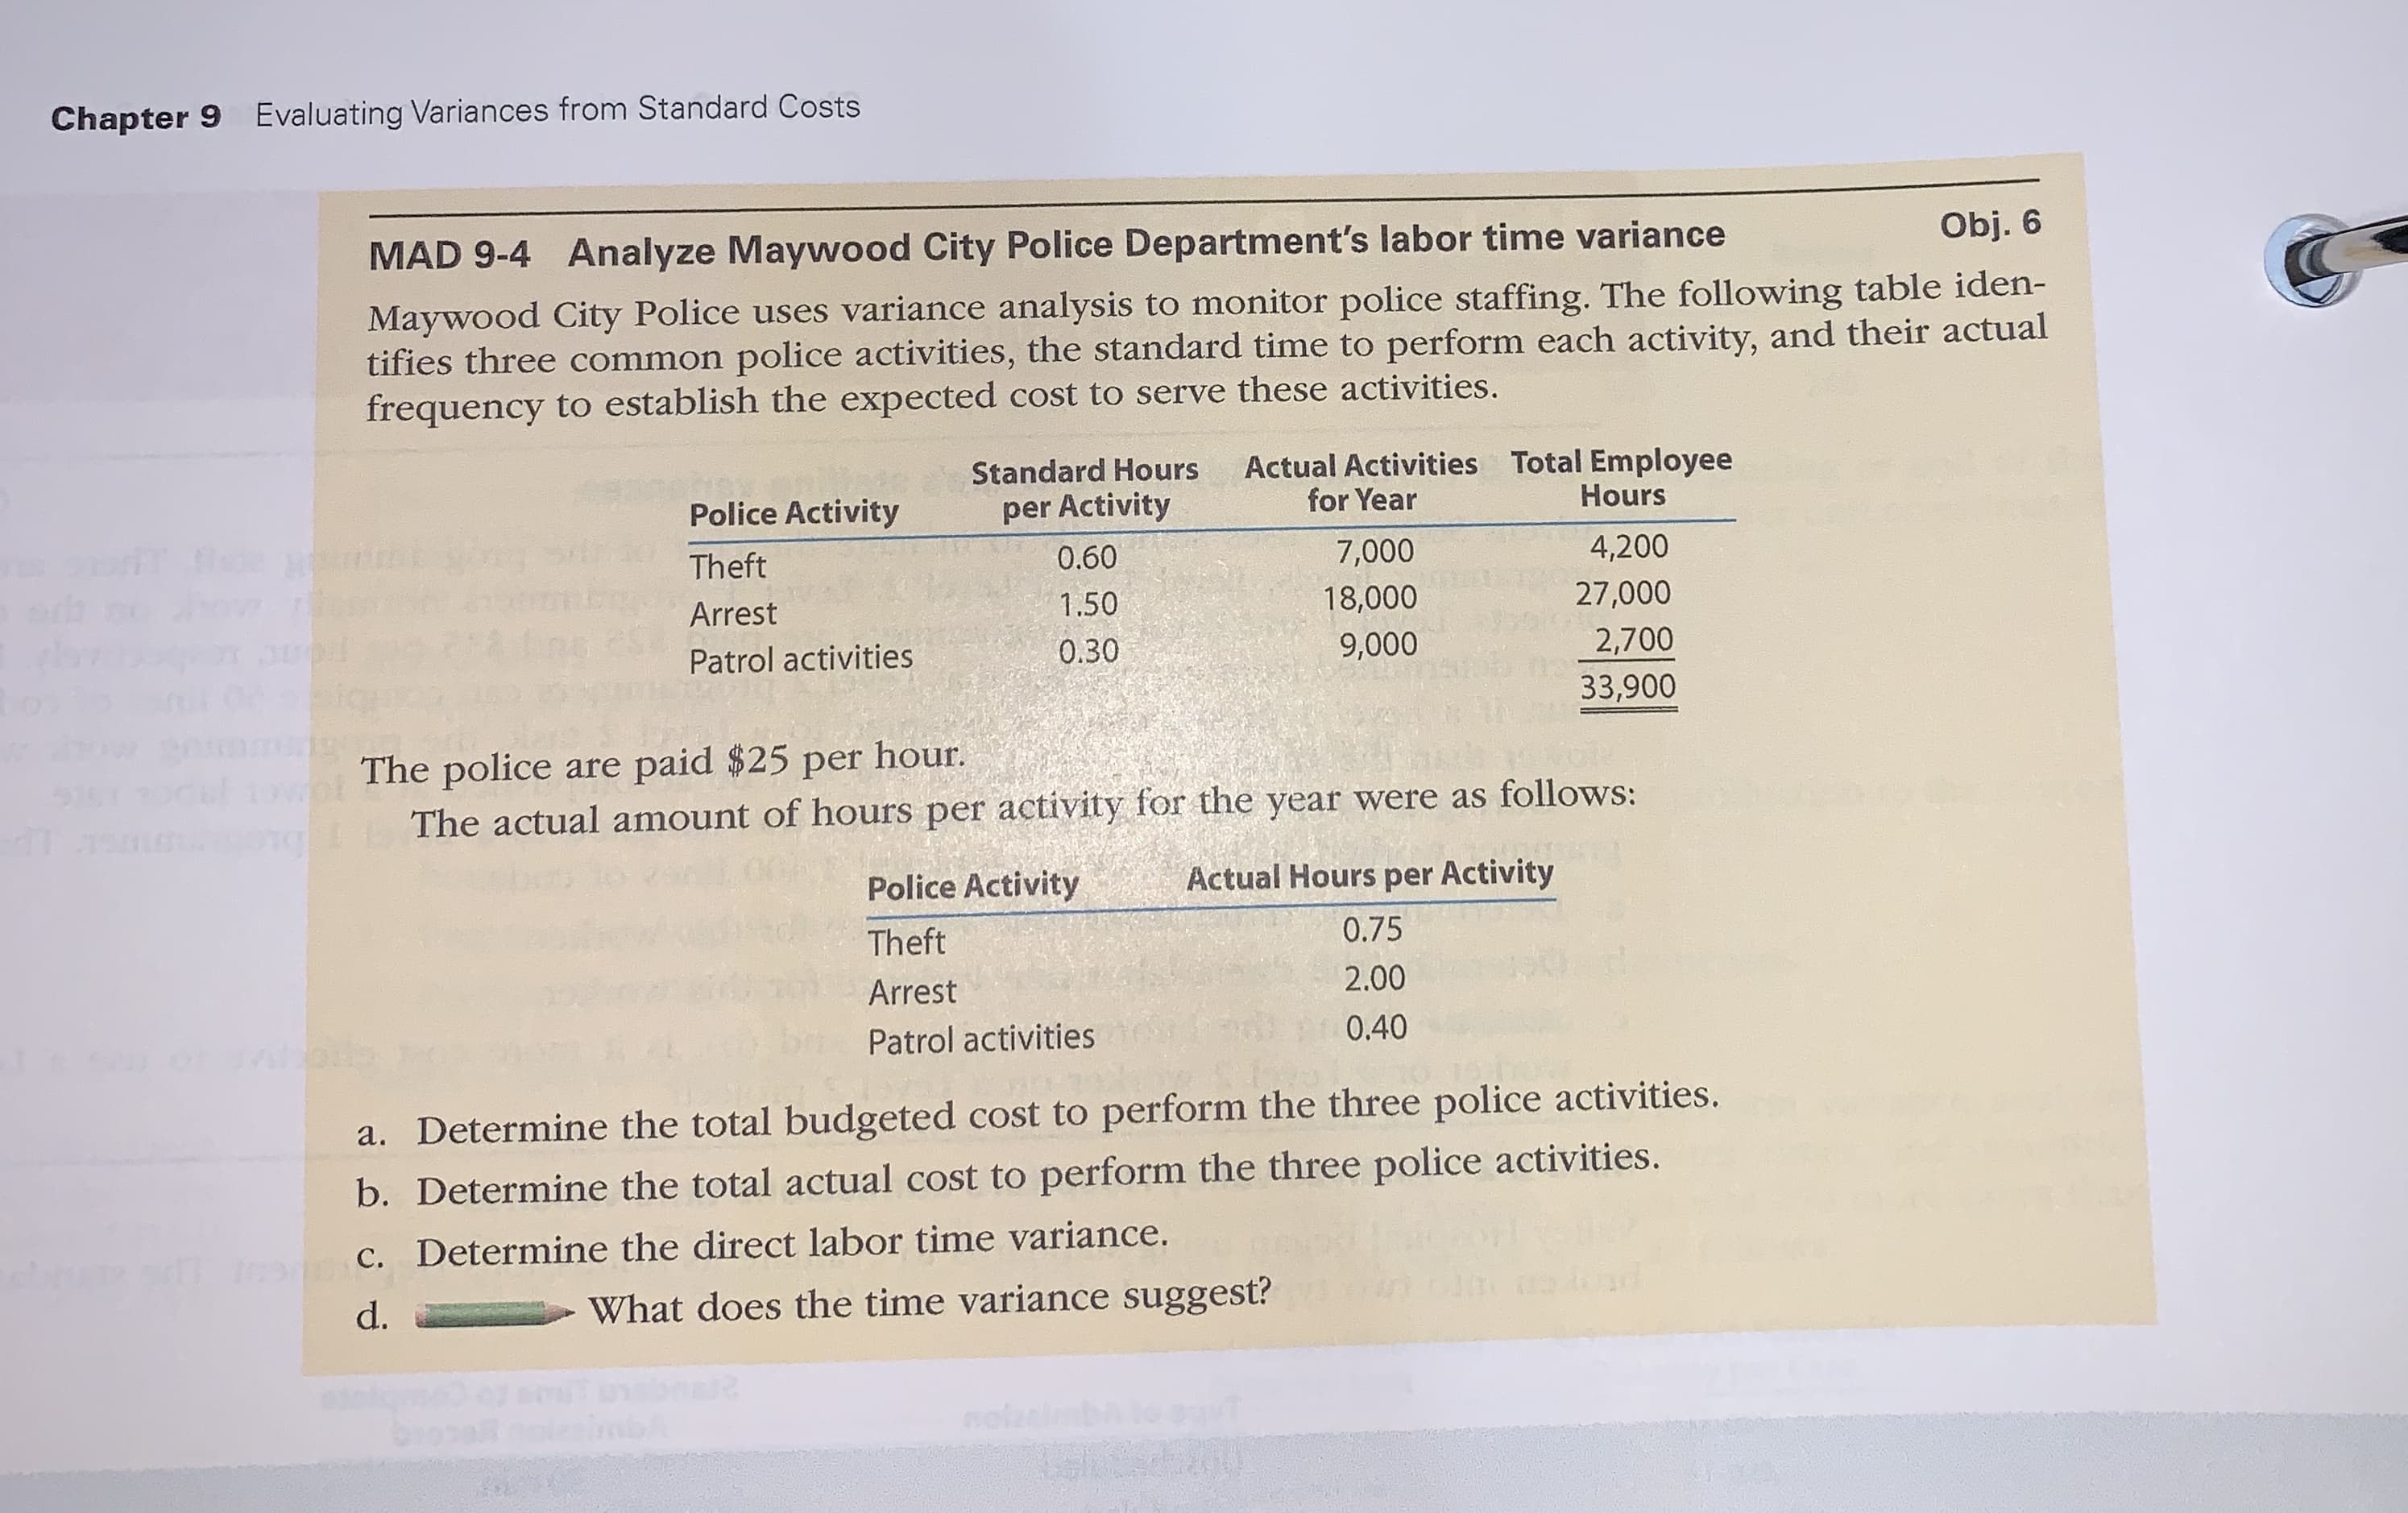 Chapter 9 Evaluating Variances from Standard Costs
MAD 9-4
Analyze Maywood City Police Department's labor time variance
Obj. 6
Maywood City Police uses variance analysis to monitor police staffing. The following table iden-
tifies three common police activities, the standard time to perform each activity, and their actual
frequency to establish the expected cost to serve these activities.
Actual Activities
for Year
Standard Hours
Total Employee
Hours
Police Activity
per Activity
Theft
0.60
7,000
4,200
18,000
27,000
1.50
Arrest
pat
9,000
2,700
0.30
Patrol activities
33,900
hour.
The police are paid $25 per
The actual amount of hours per activity for the year were as follows:
OV
Actual Hours per Activity
Police Activity
0.75
Theft
2.00
Arrest
0.40
Patrol activities
a. Determine the total budgeted cost to perform the three police activities.
b. Determine the total actual cost to perform the three police activities.
c. Determine the direct labor time variance.
0 2
What does the time variance suggest?
d.
nolzal
